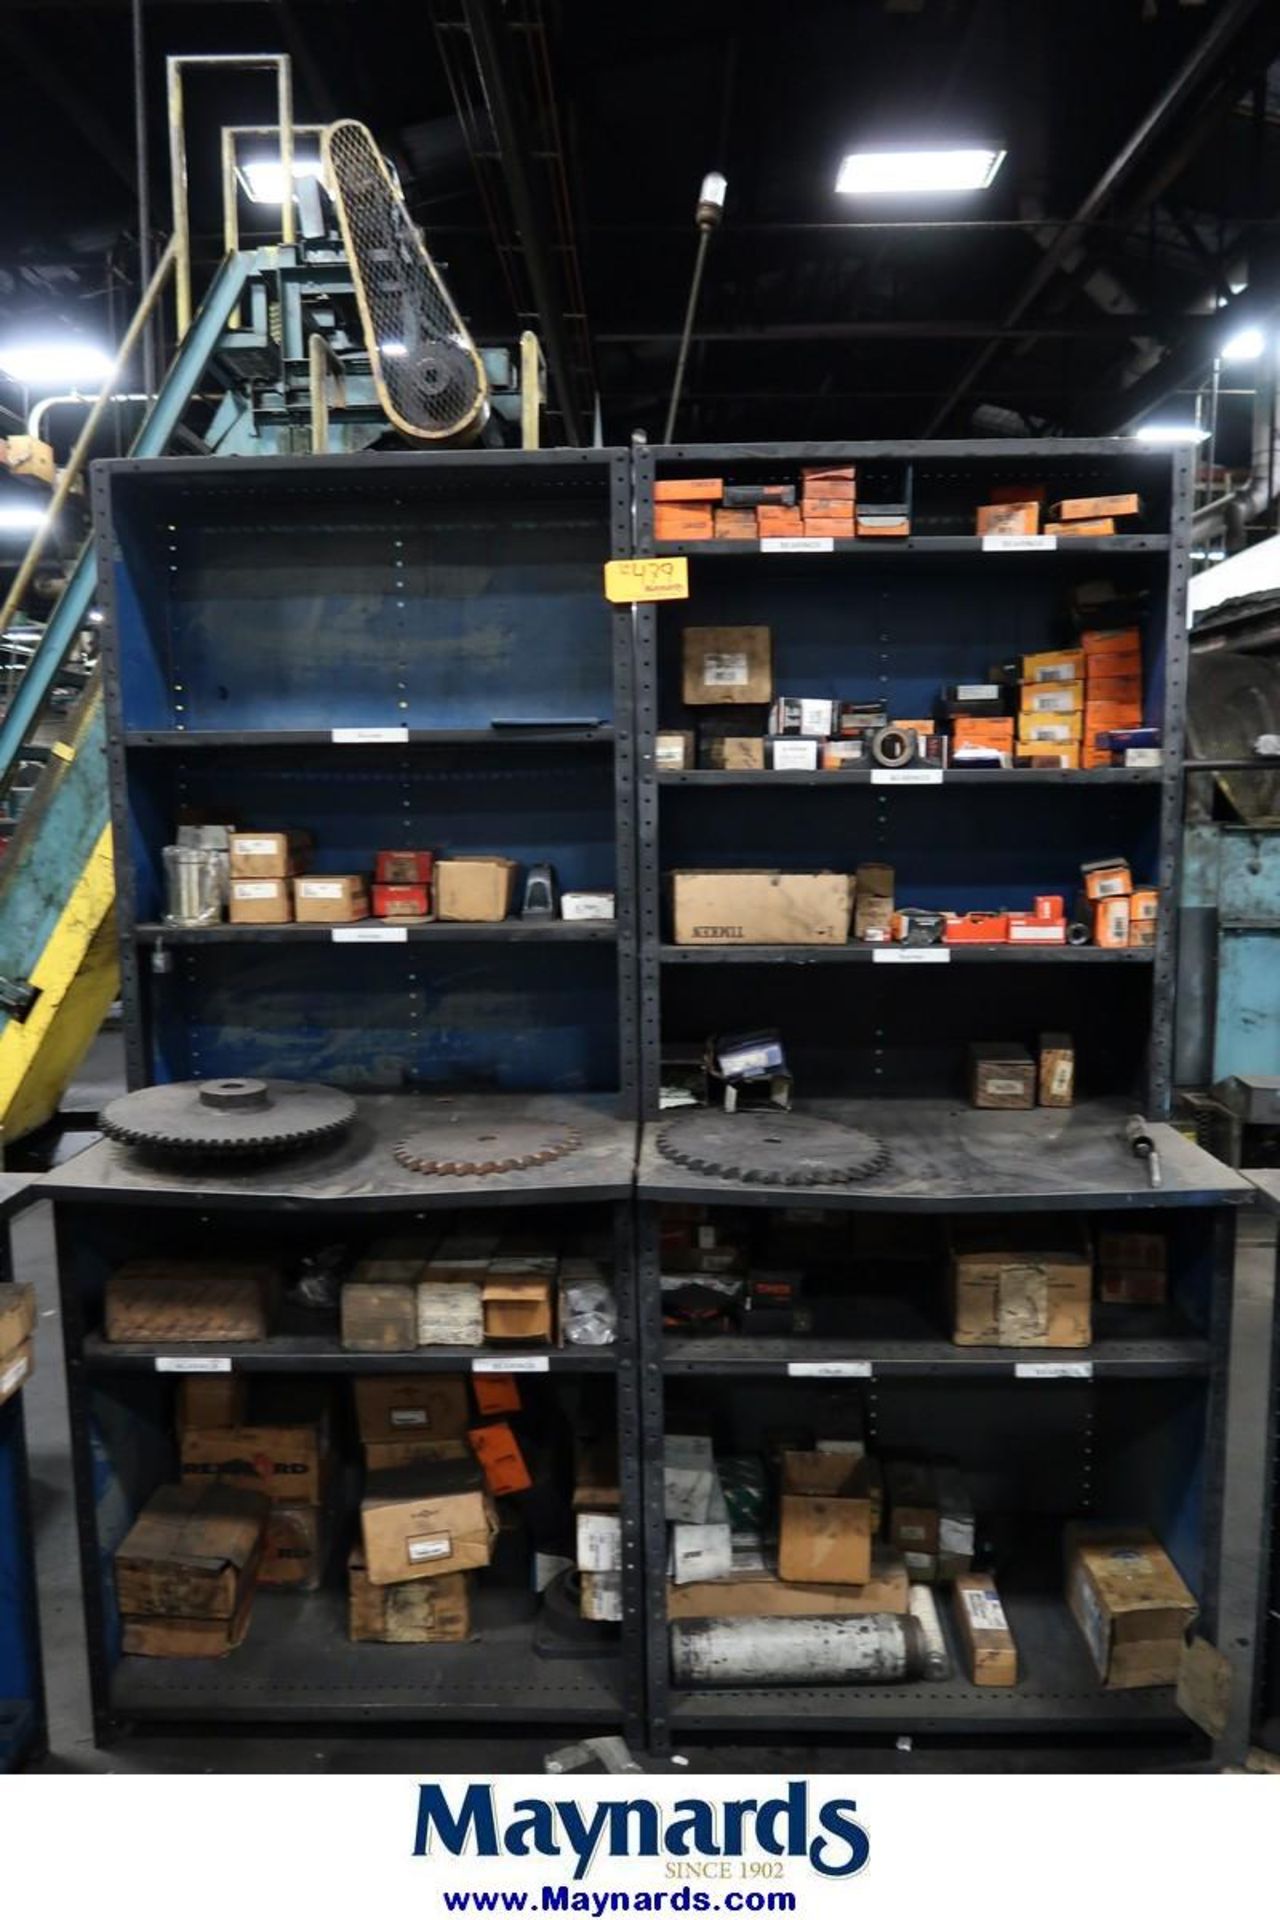 Adjustable Steel Shelving Units with Contents of Heat Treat Spare Parts - Image 2 of 16